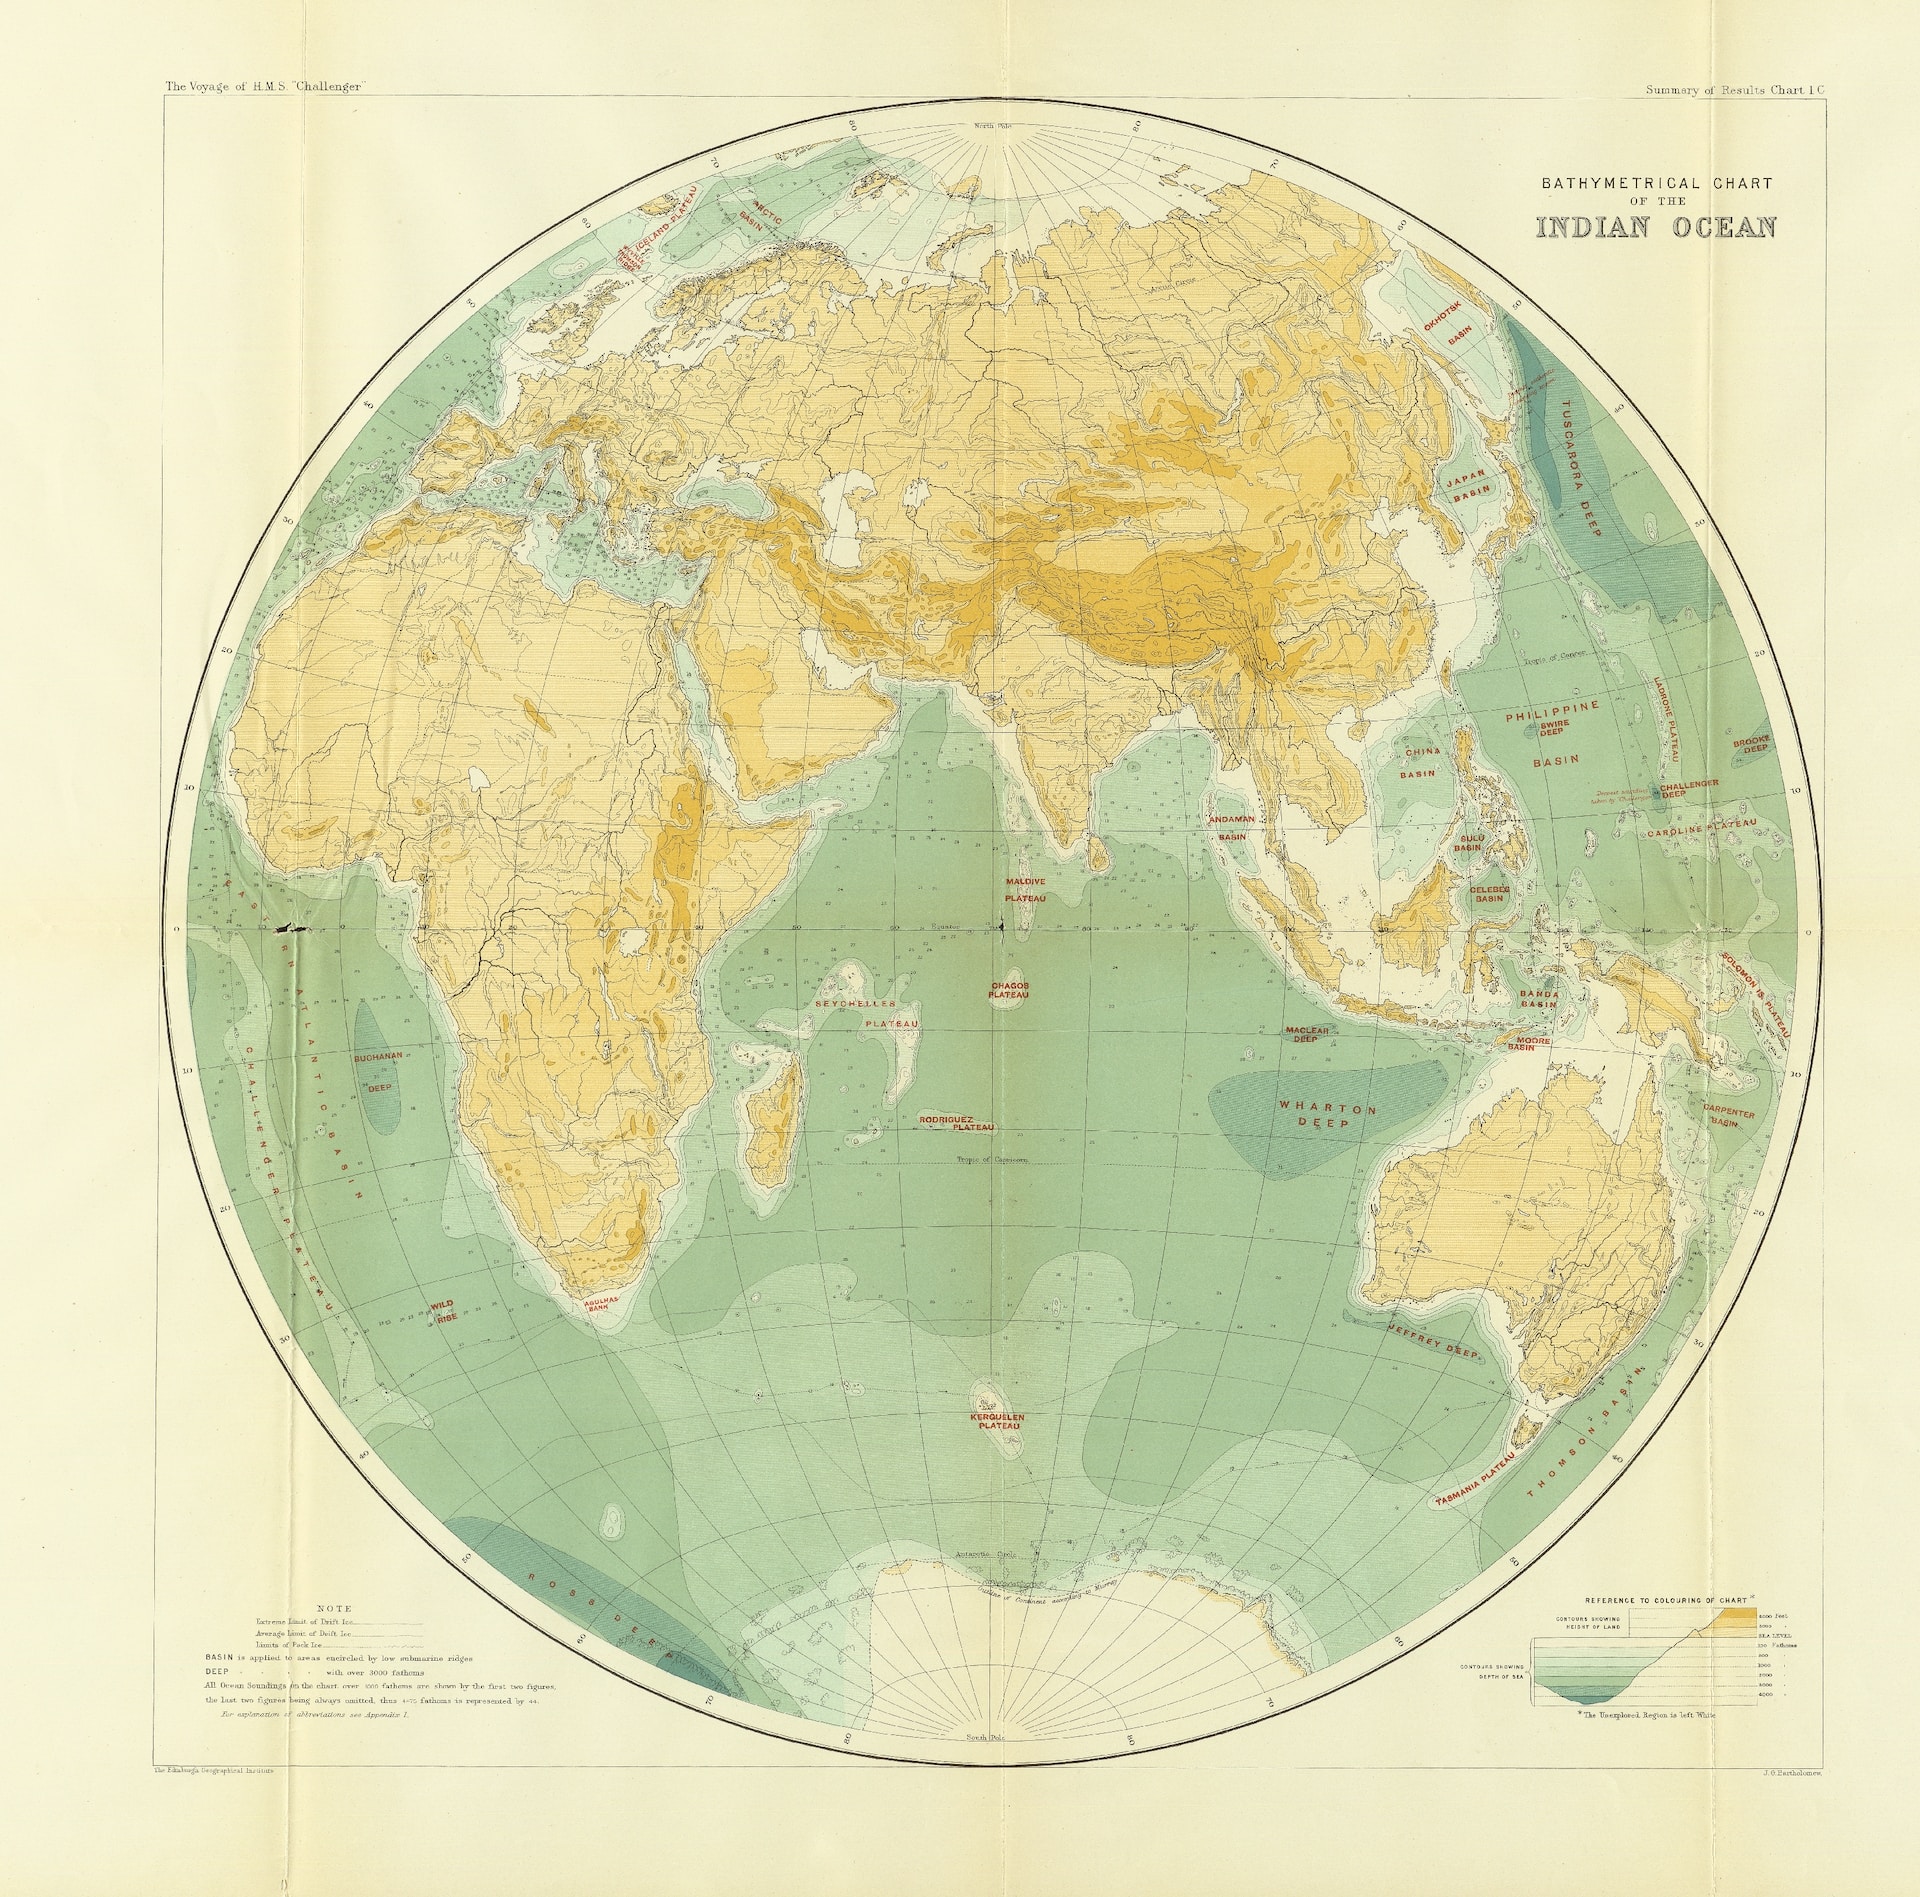 A physical map of Earth